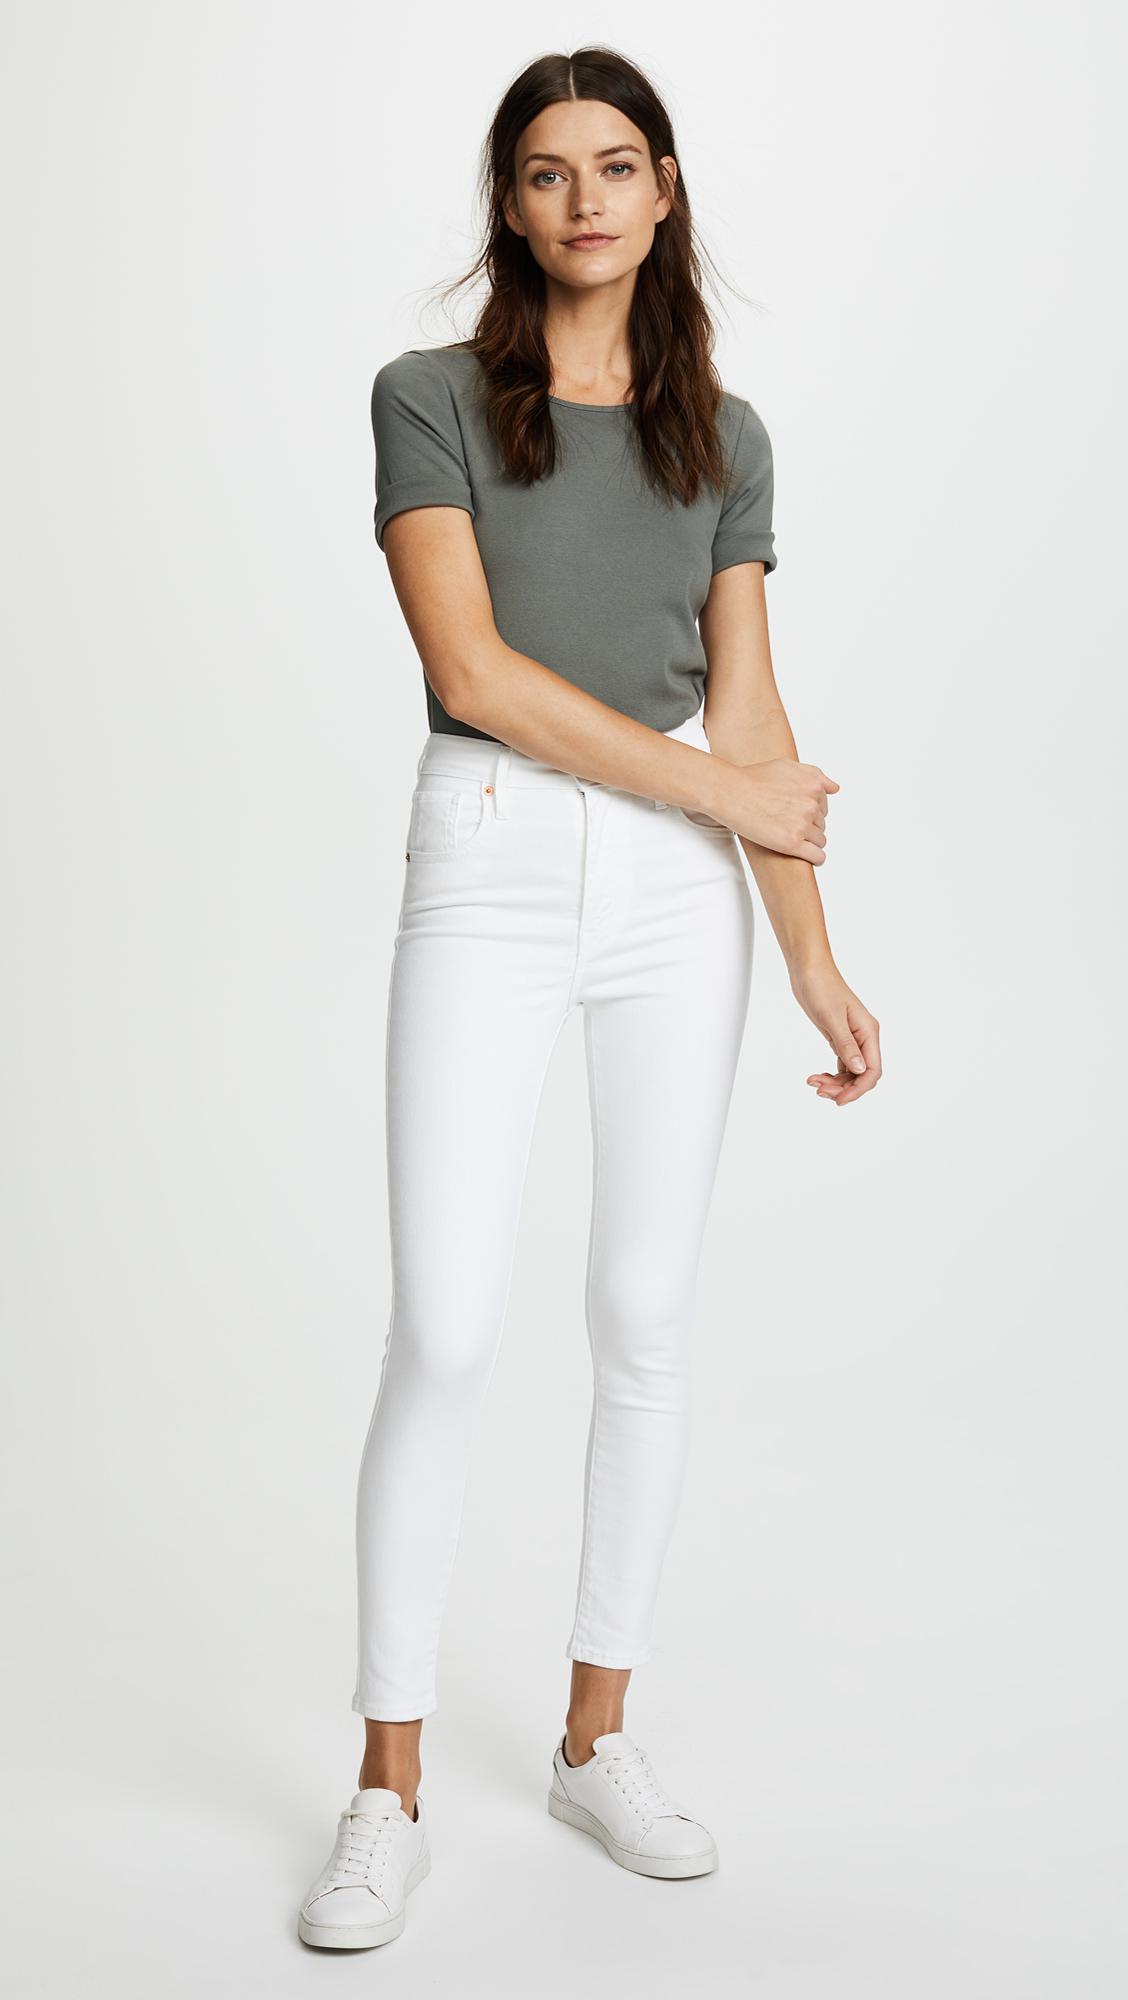 Levi's Mile High Ankle Super Skinny Jeans in White | Lyst